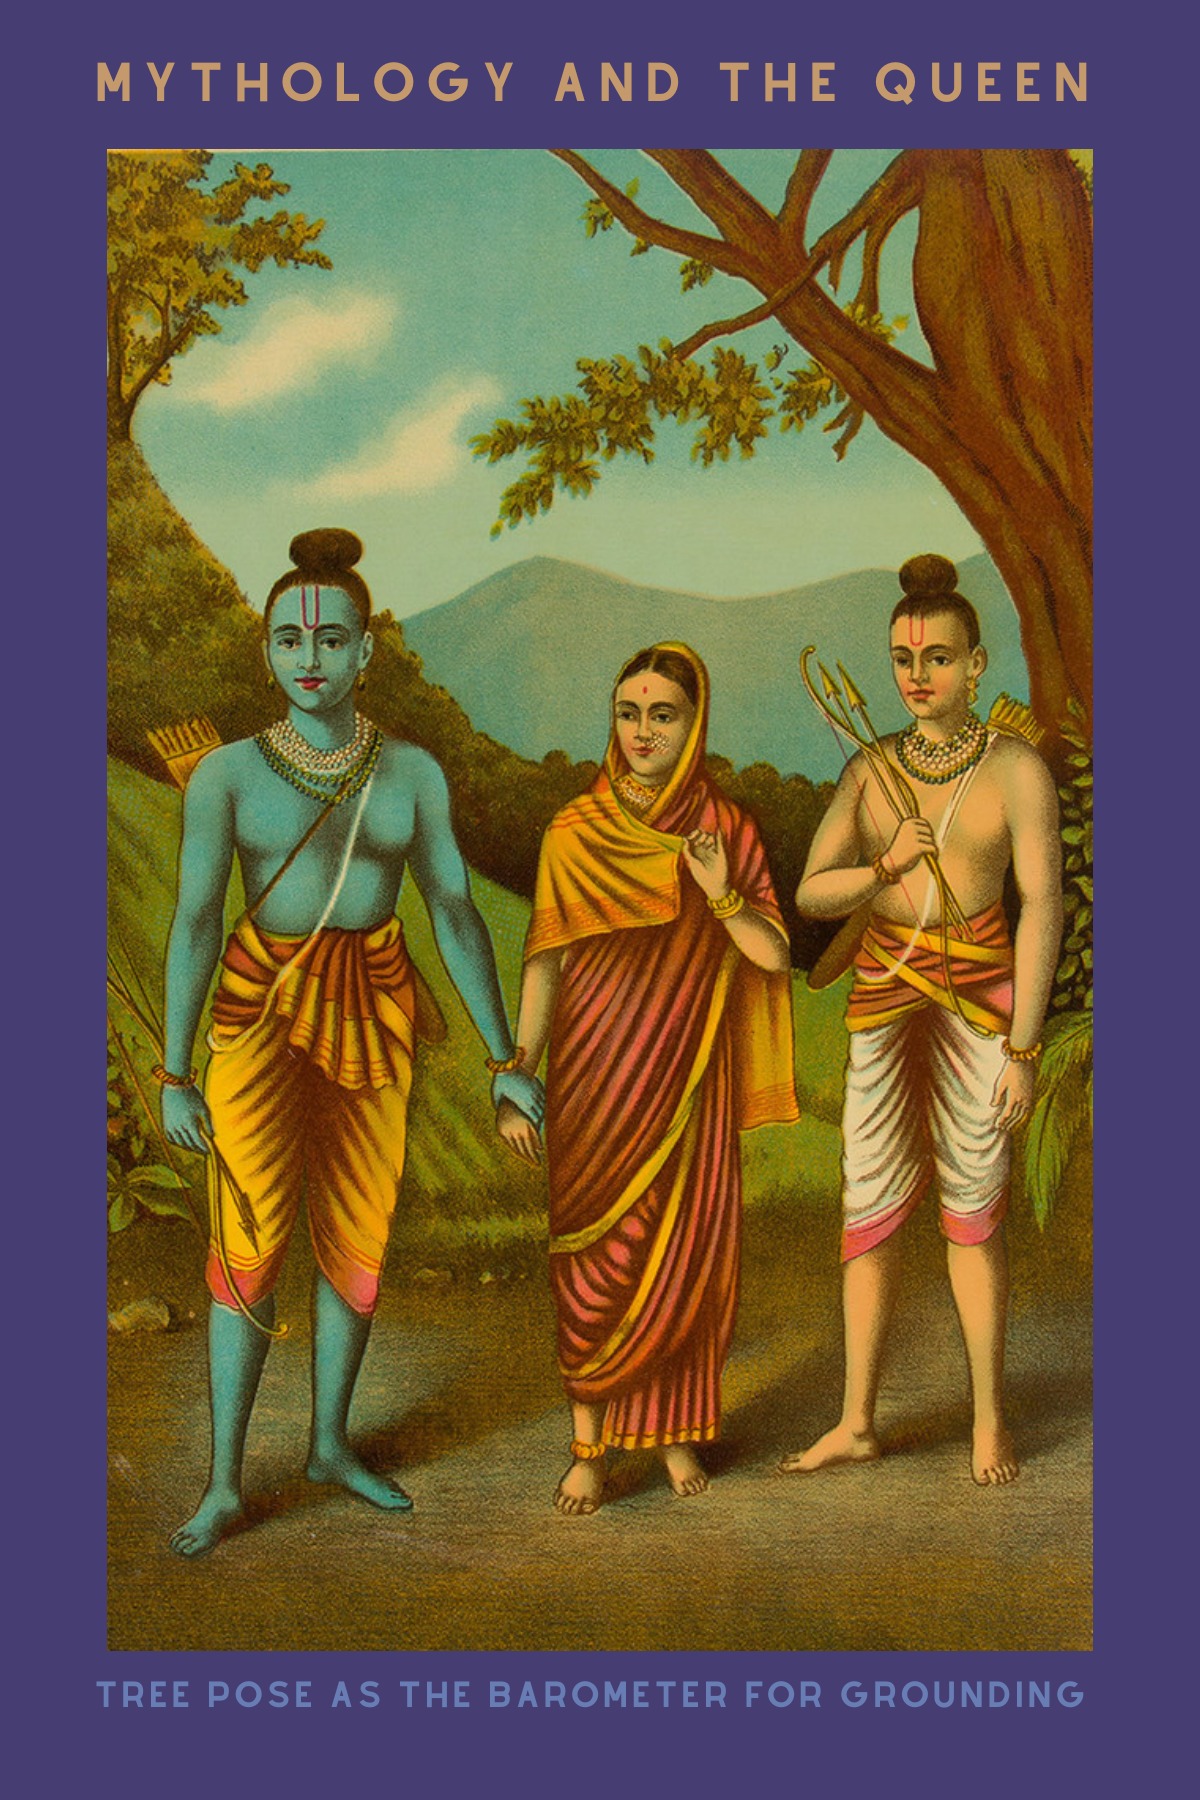 Queen Sita in the forest - Rama, Sita and Lakshmana